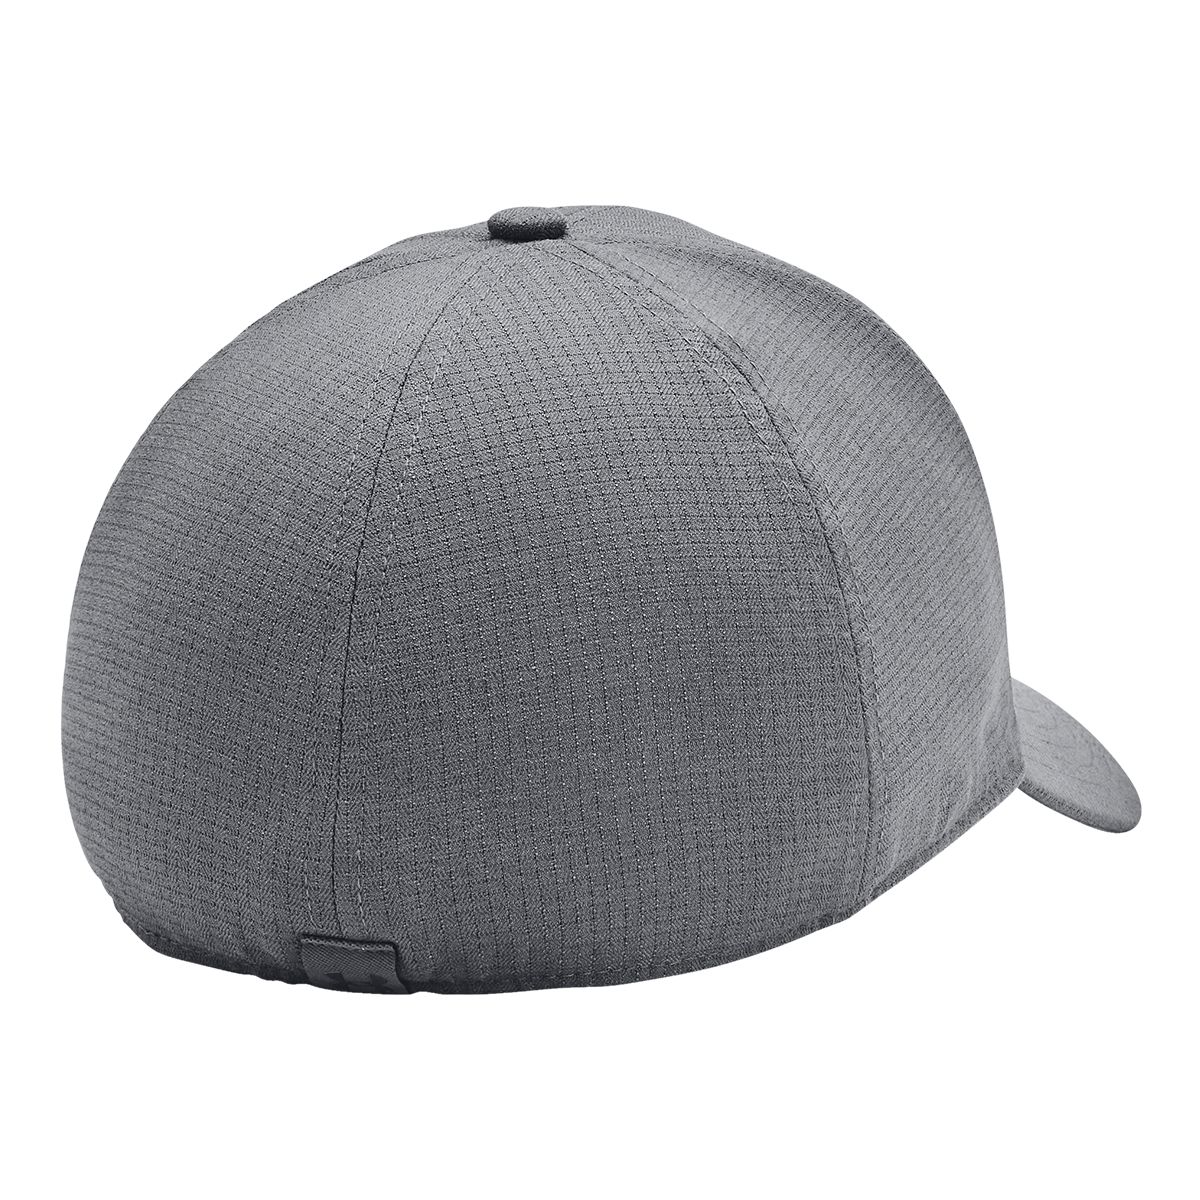 Under Armour Men's Iso-Chill ArmourVent Stretch Cap